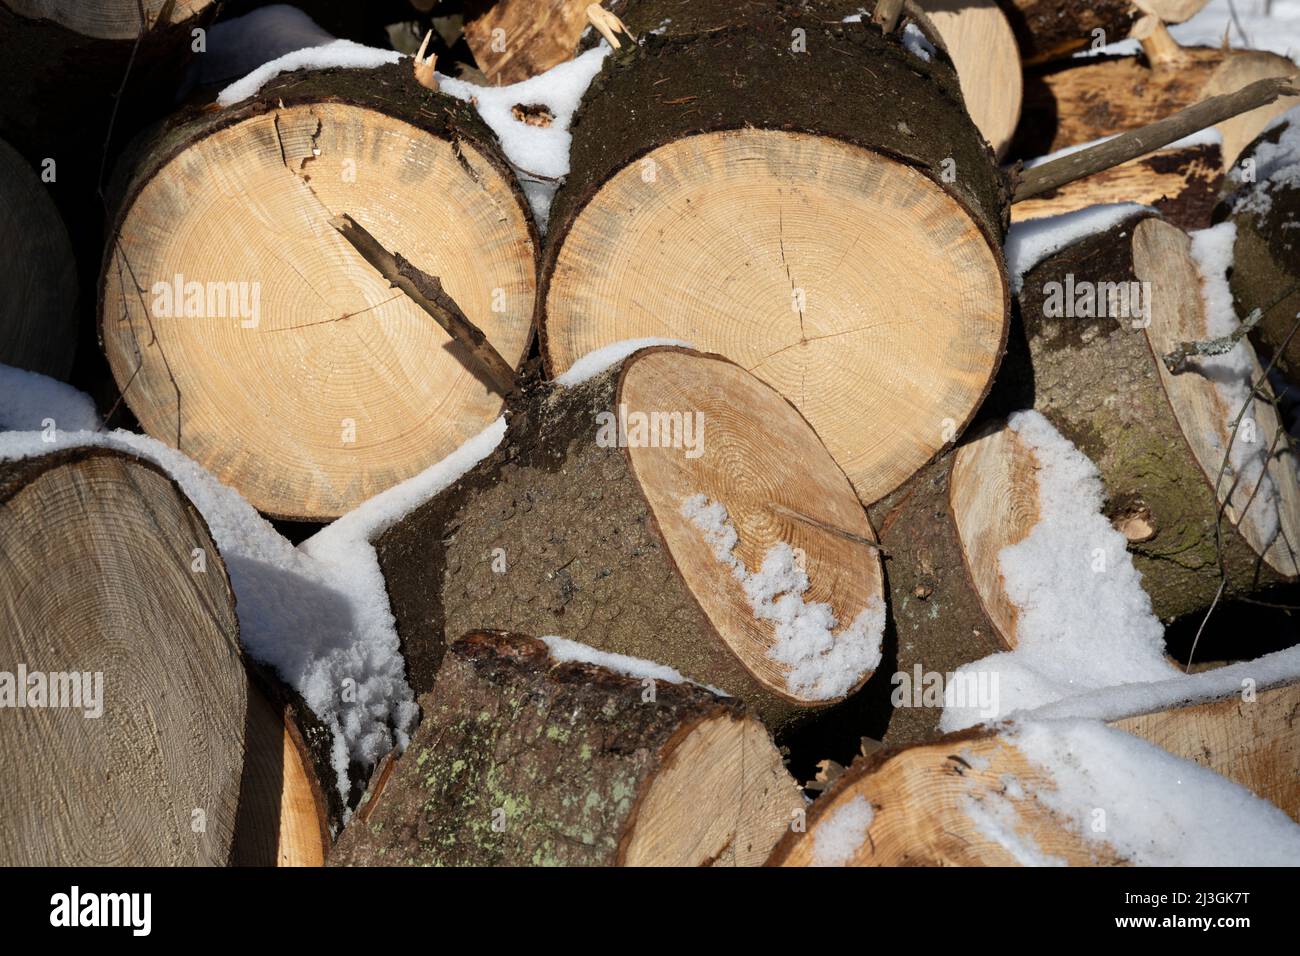 Wooden logs for cooking firewood with visible tree-ring dating close-up Stock Photo